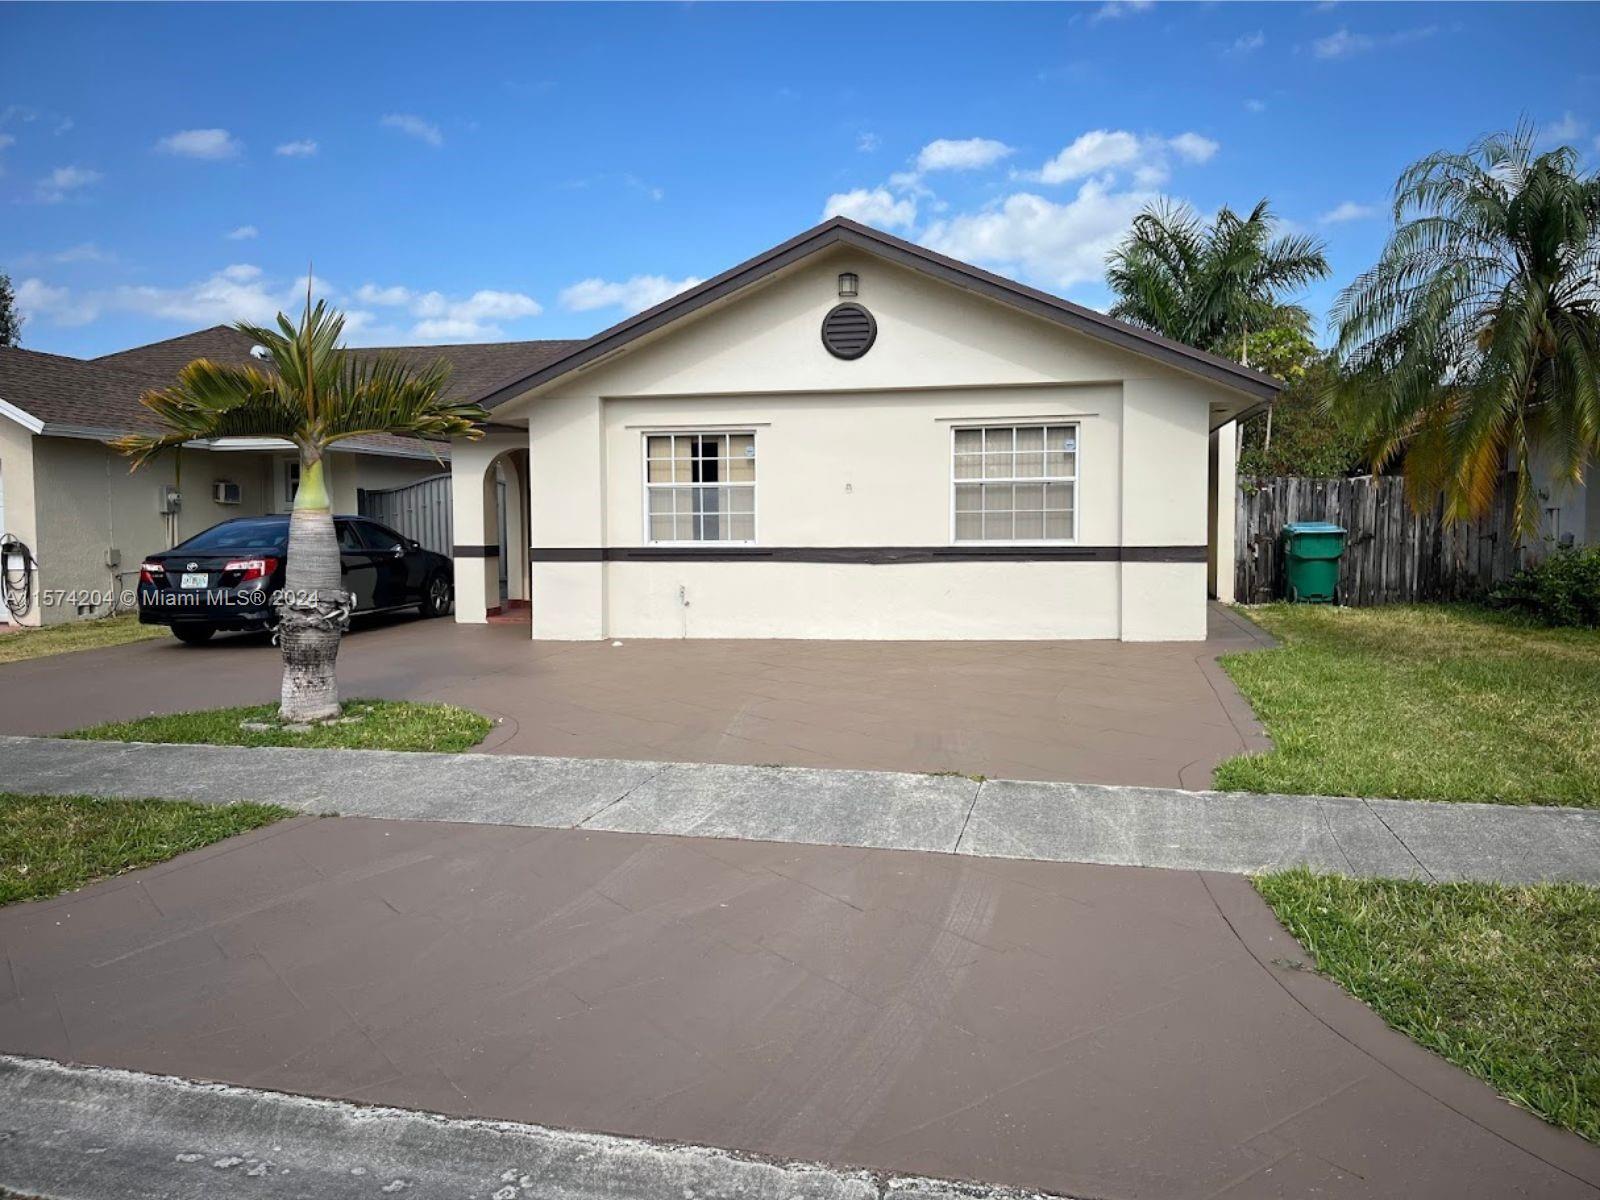 Don't miss best deal in Kendall! Single Family House-1 story (1,519 sq.ft.) in quiet residential nei